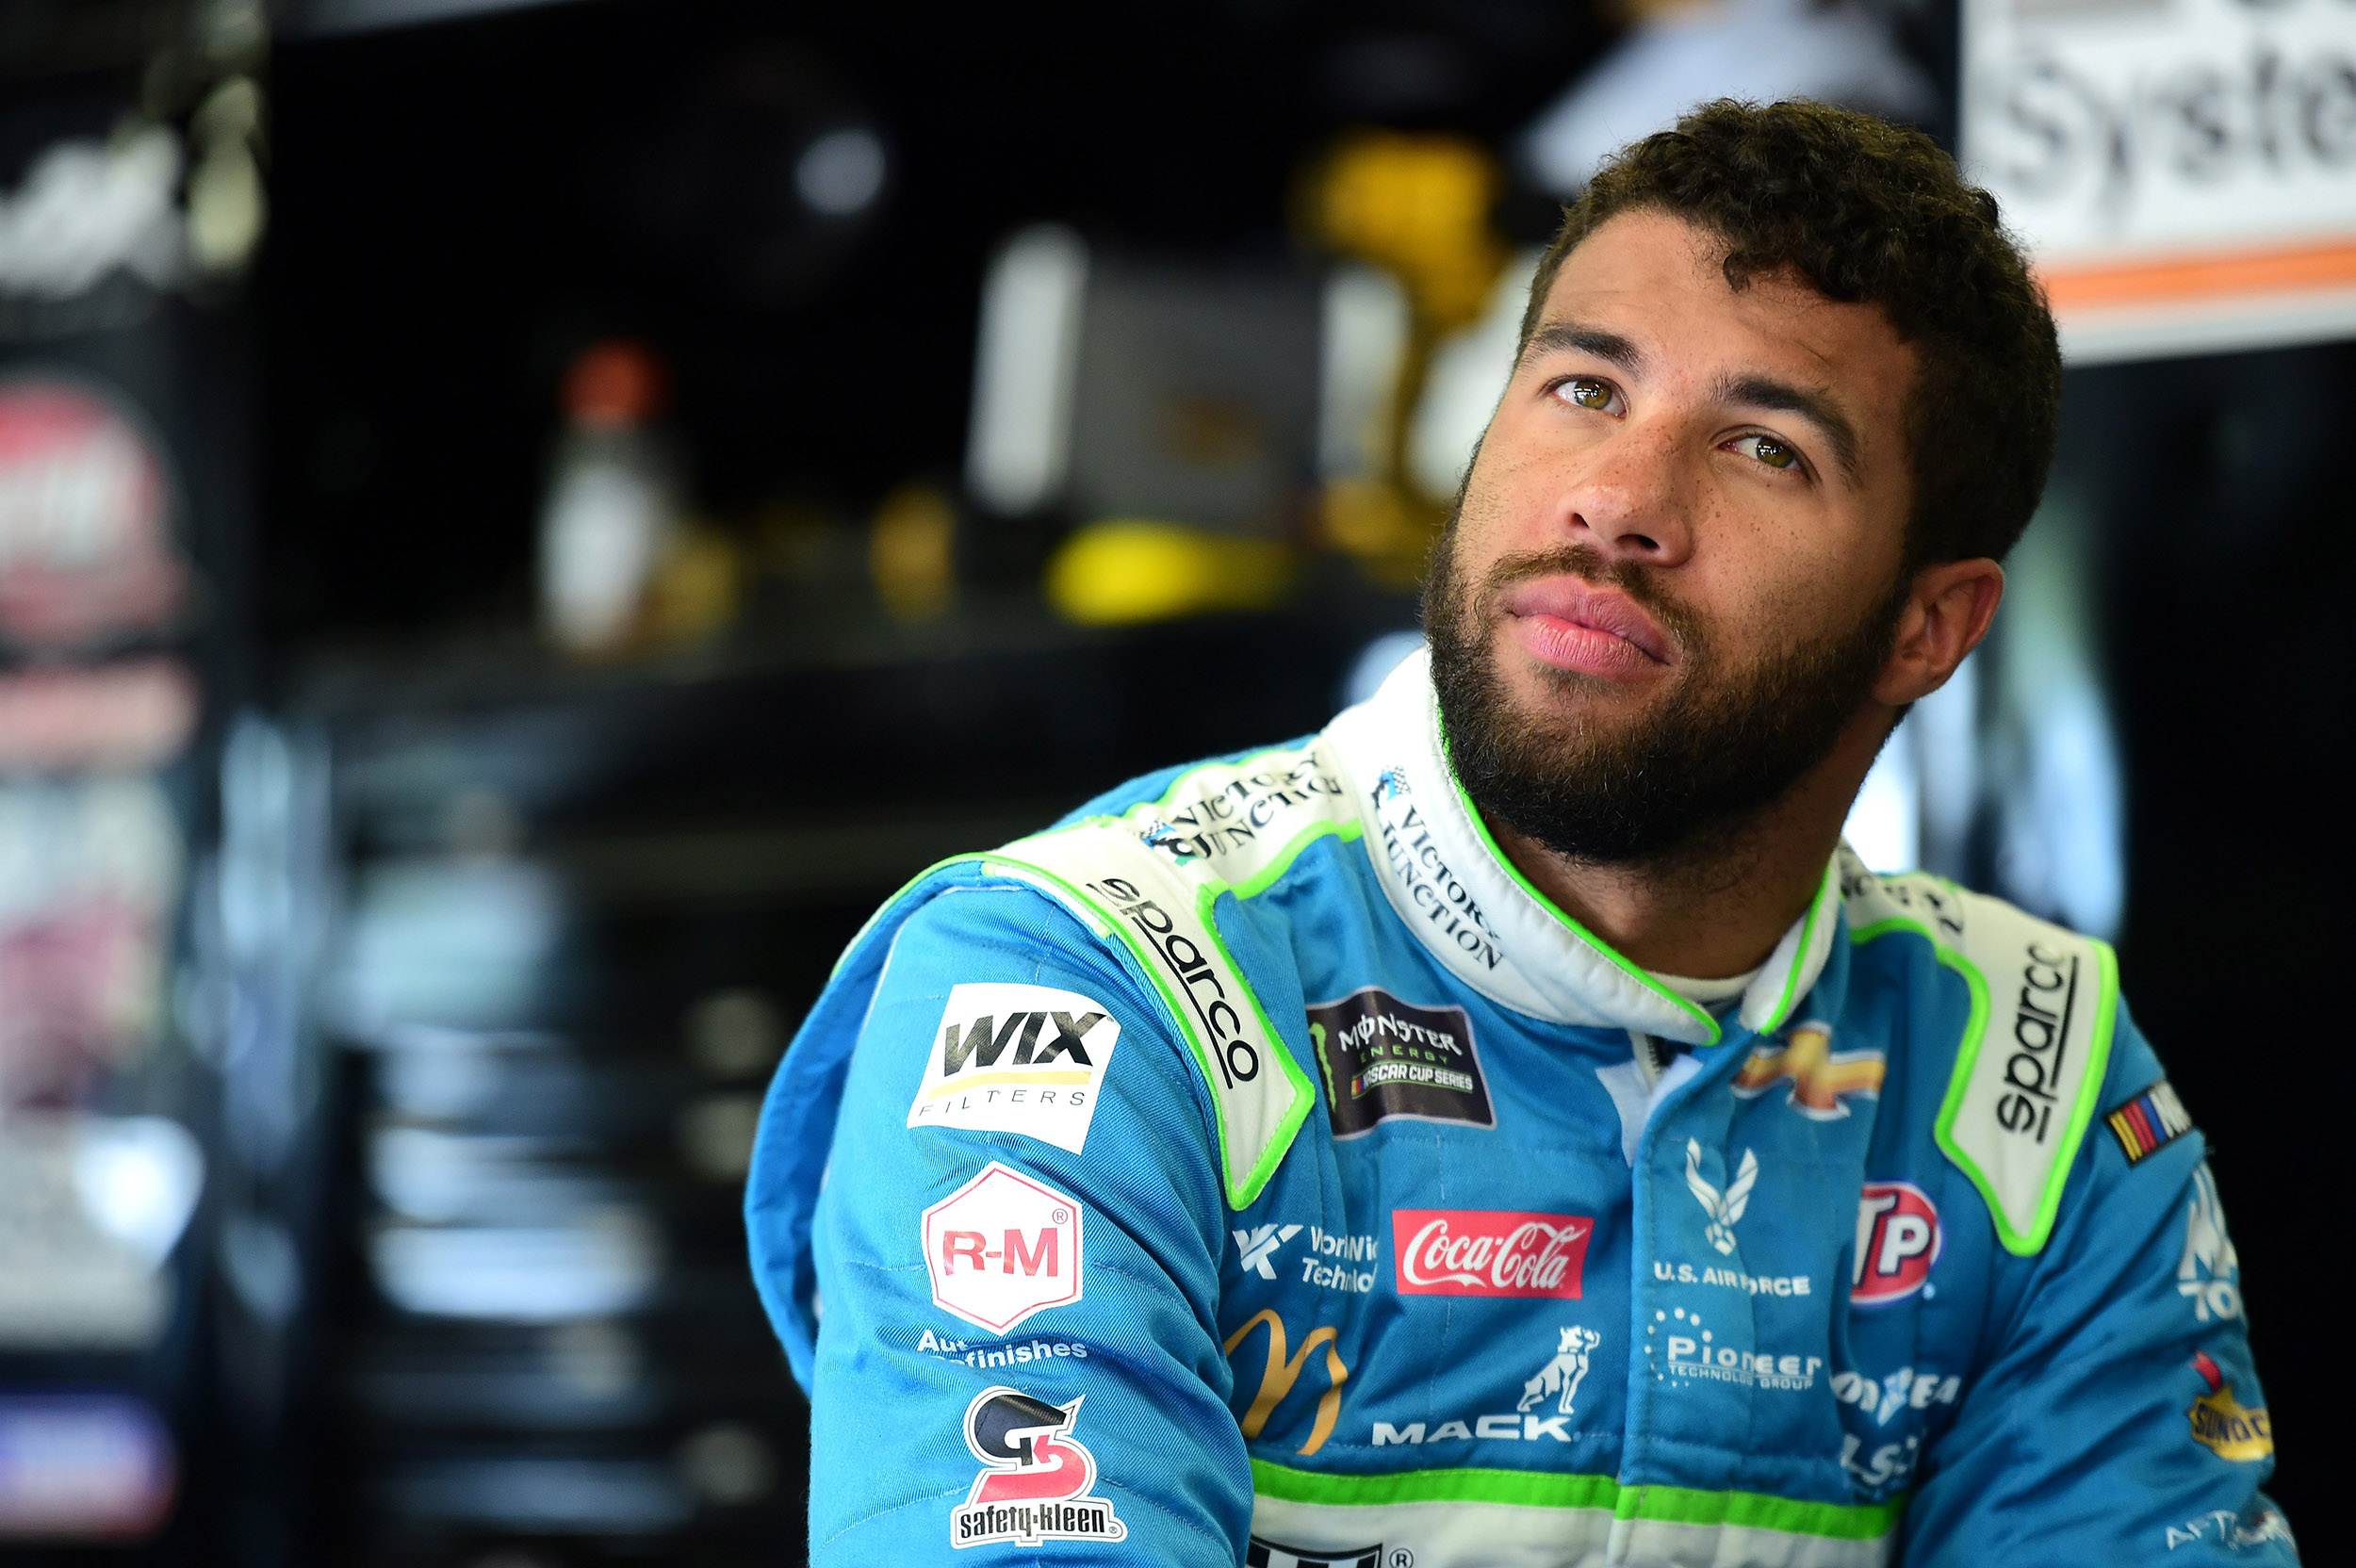 What Happened To Bubba Wallace